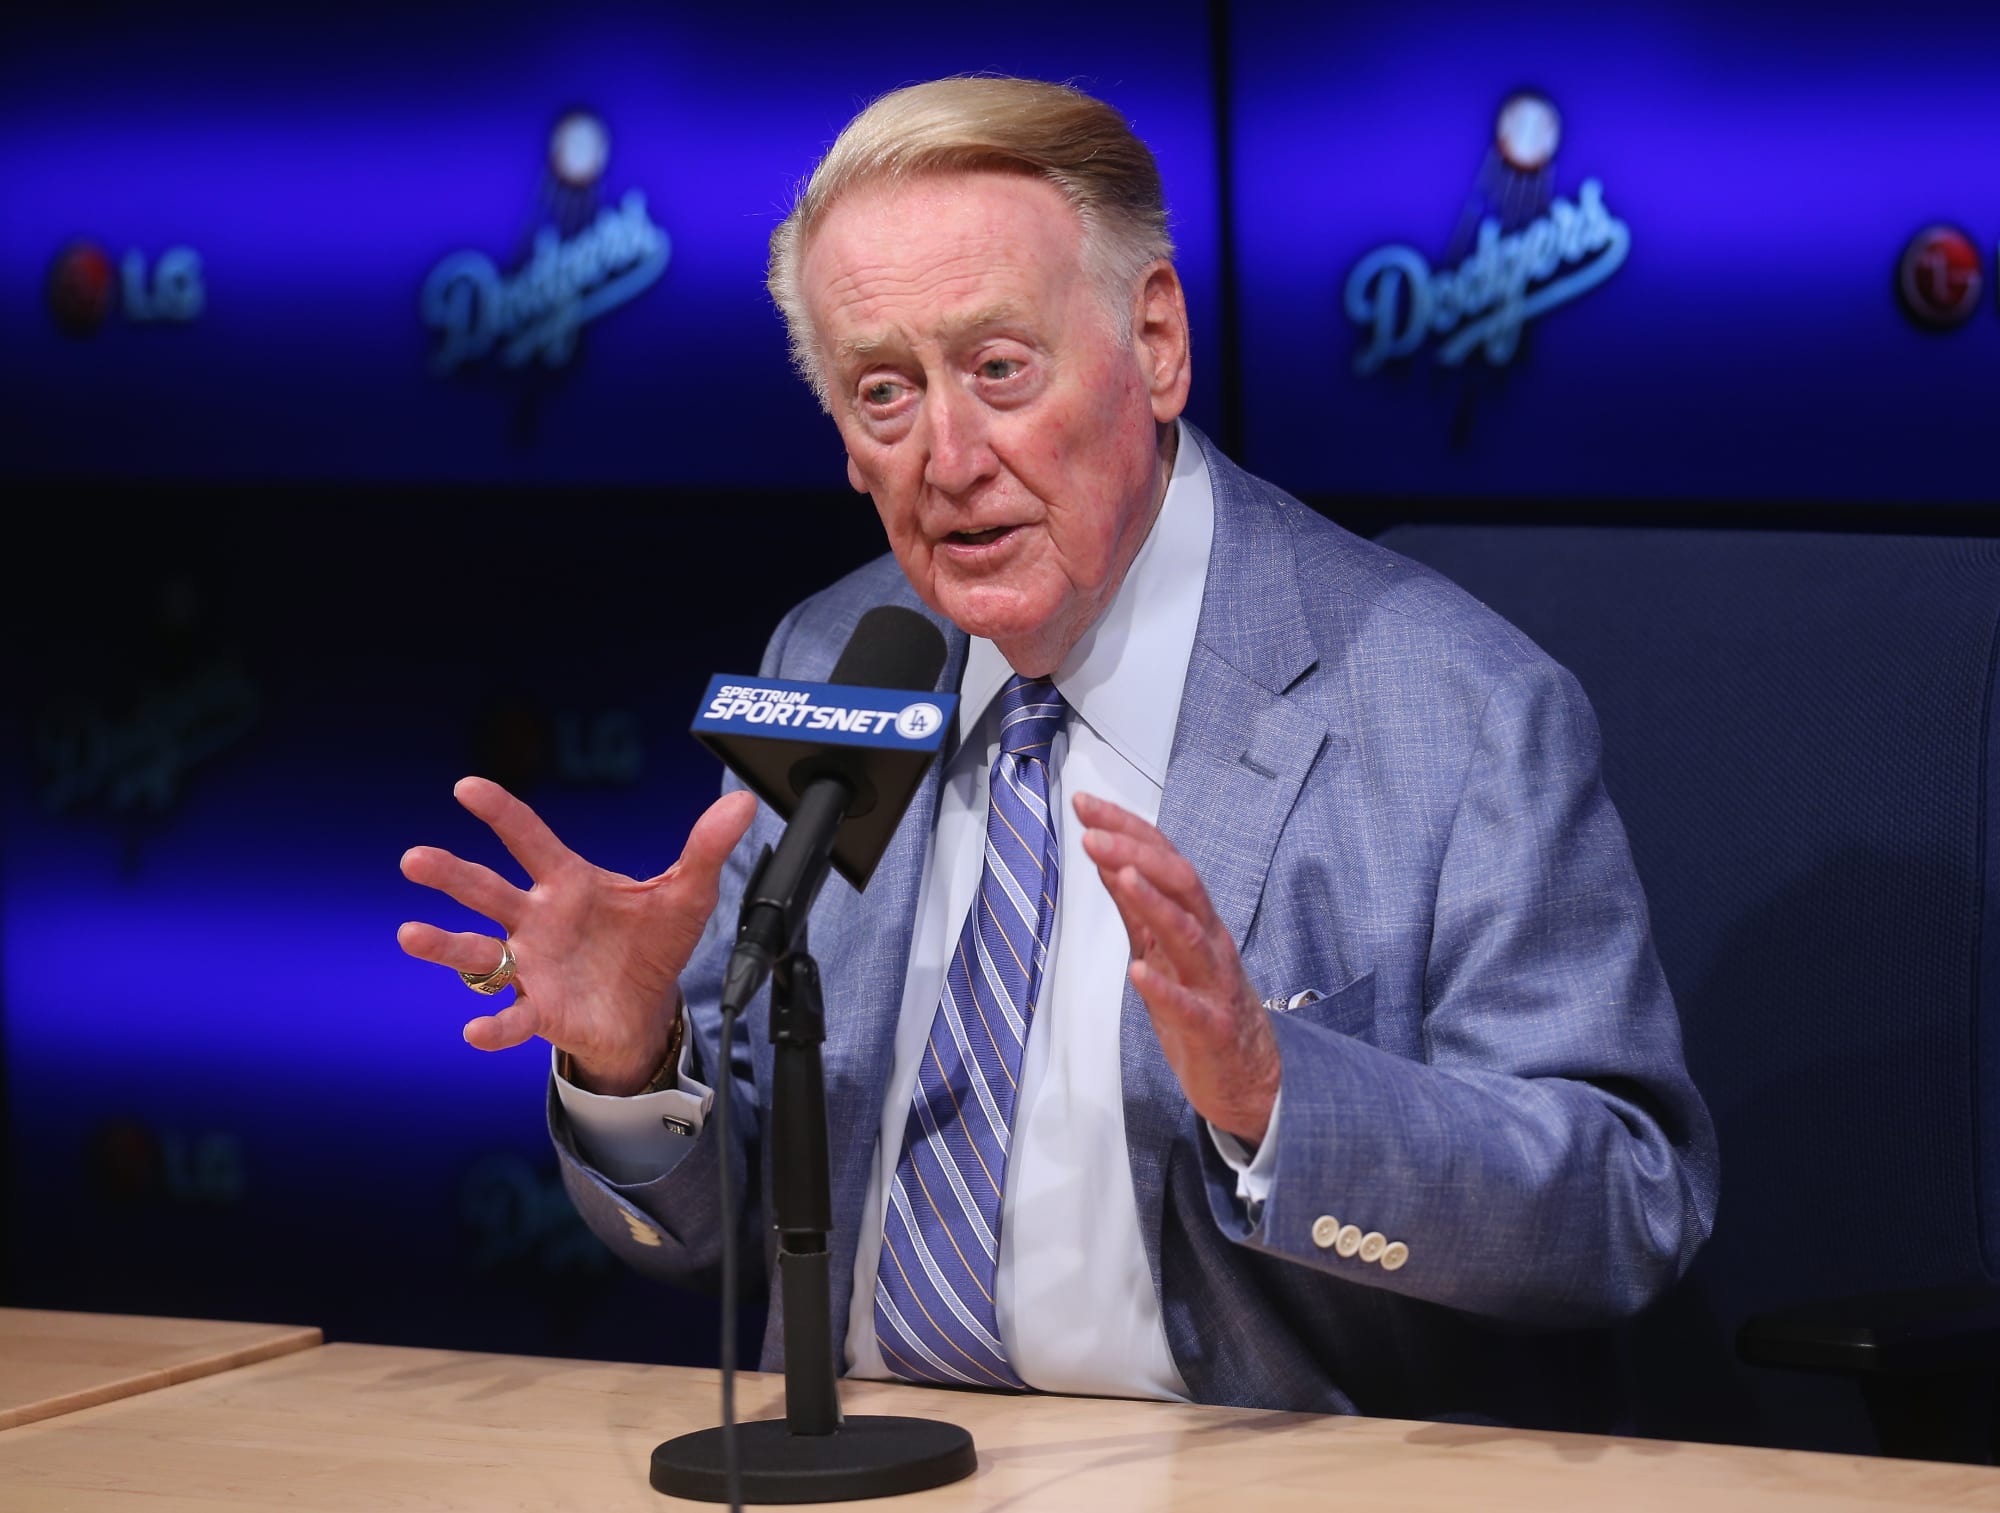 It's time for dodger baseball!The voice of LA!My new public vin